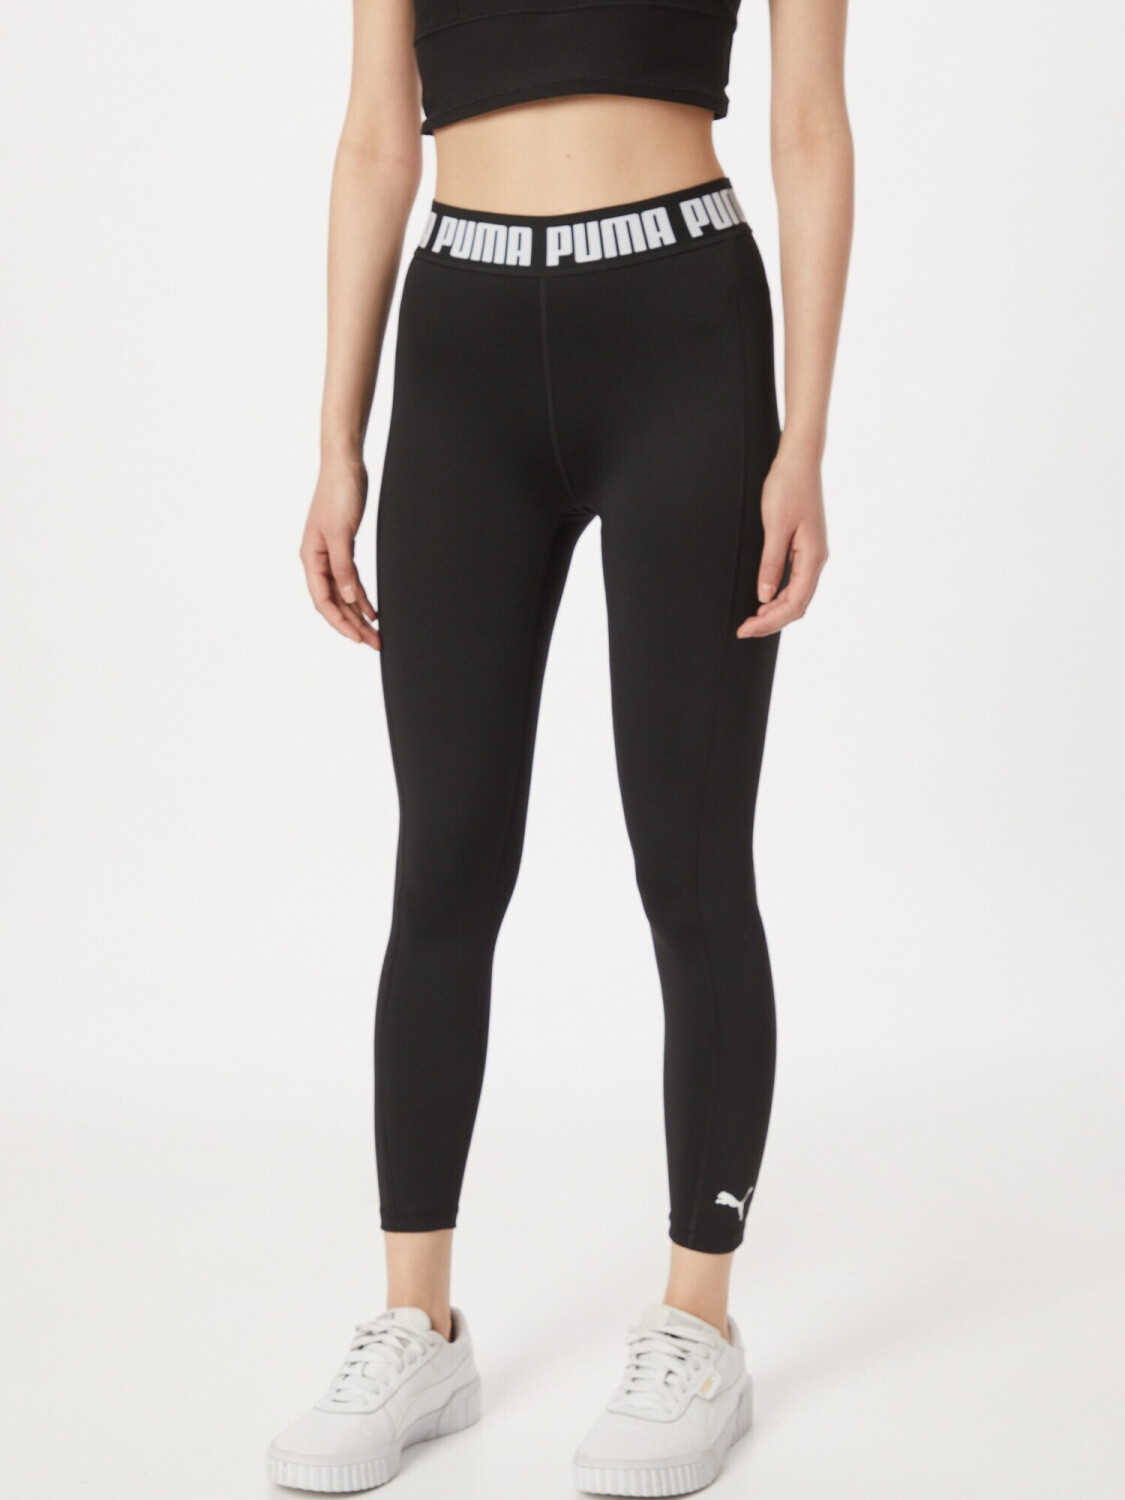 on Puma Best – High Full Strong (Today) (521601) Leggings from Waist black Deals £12.00 puma Buy